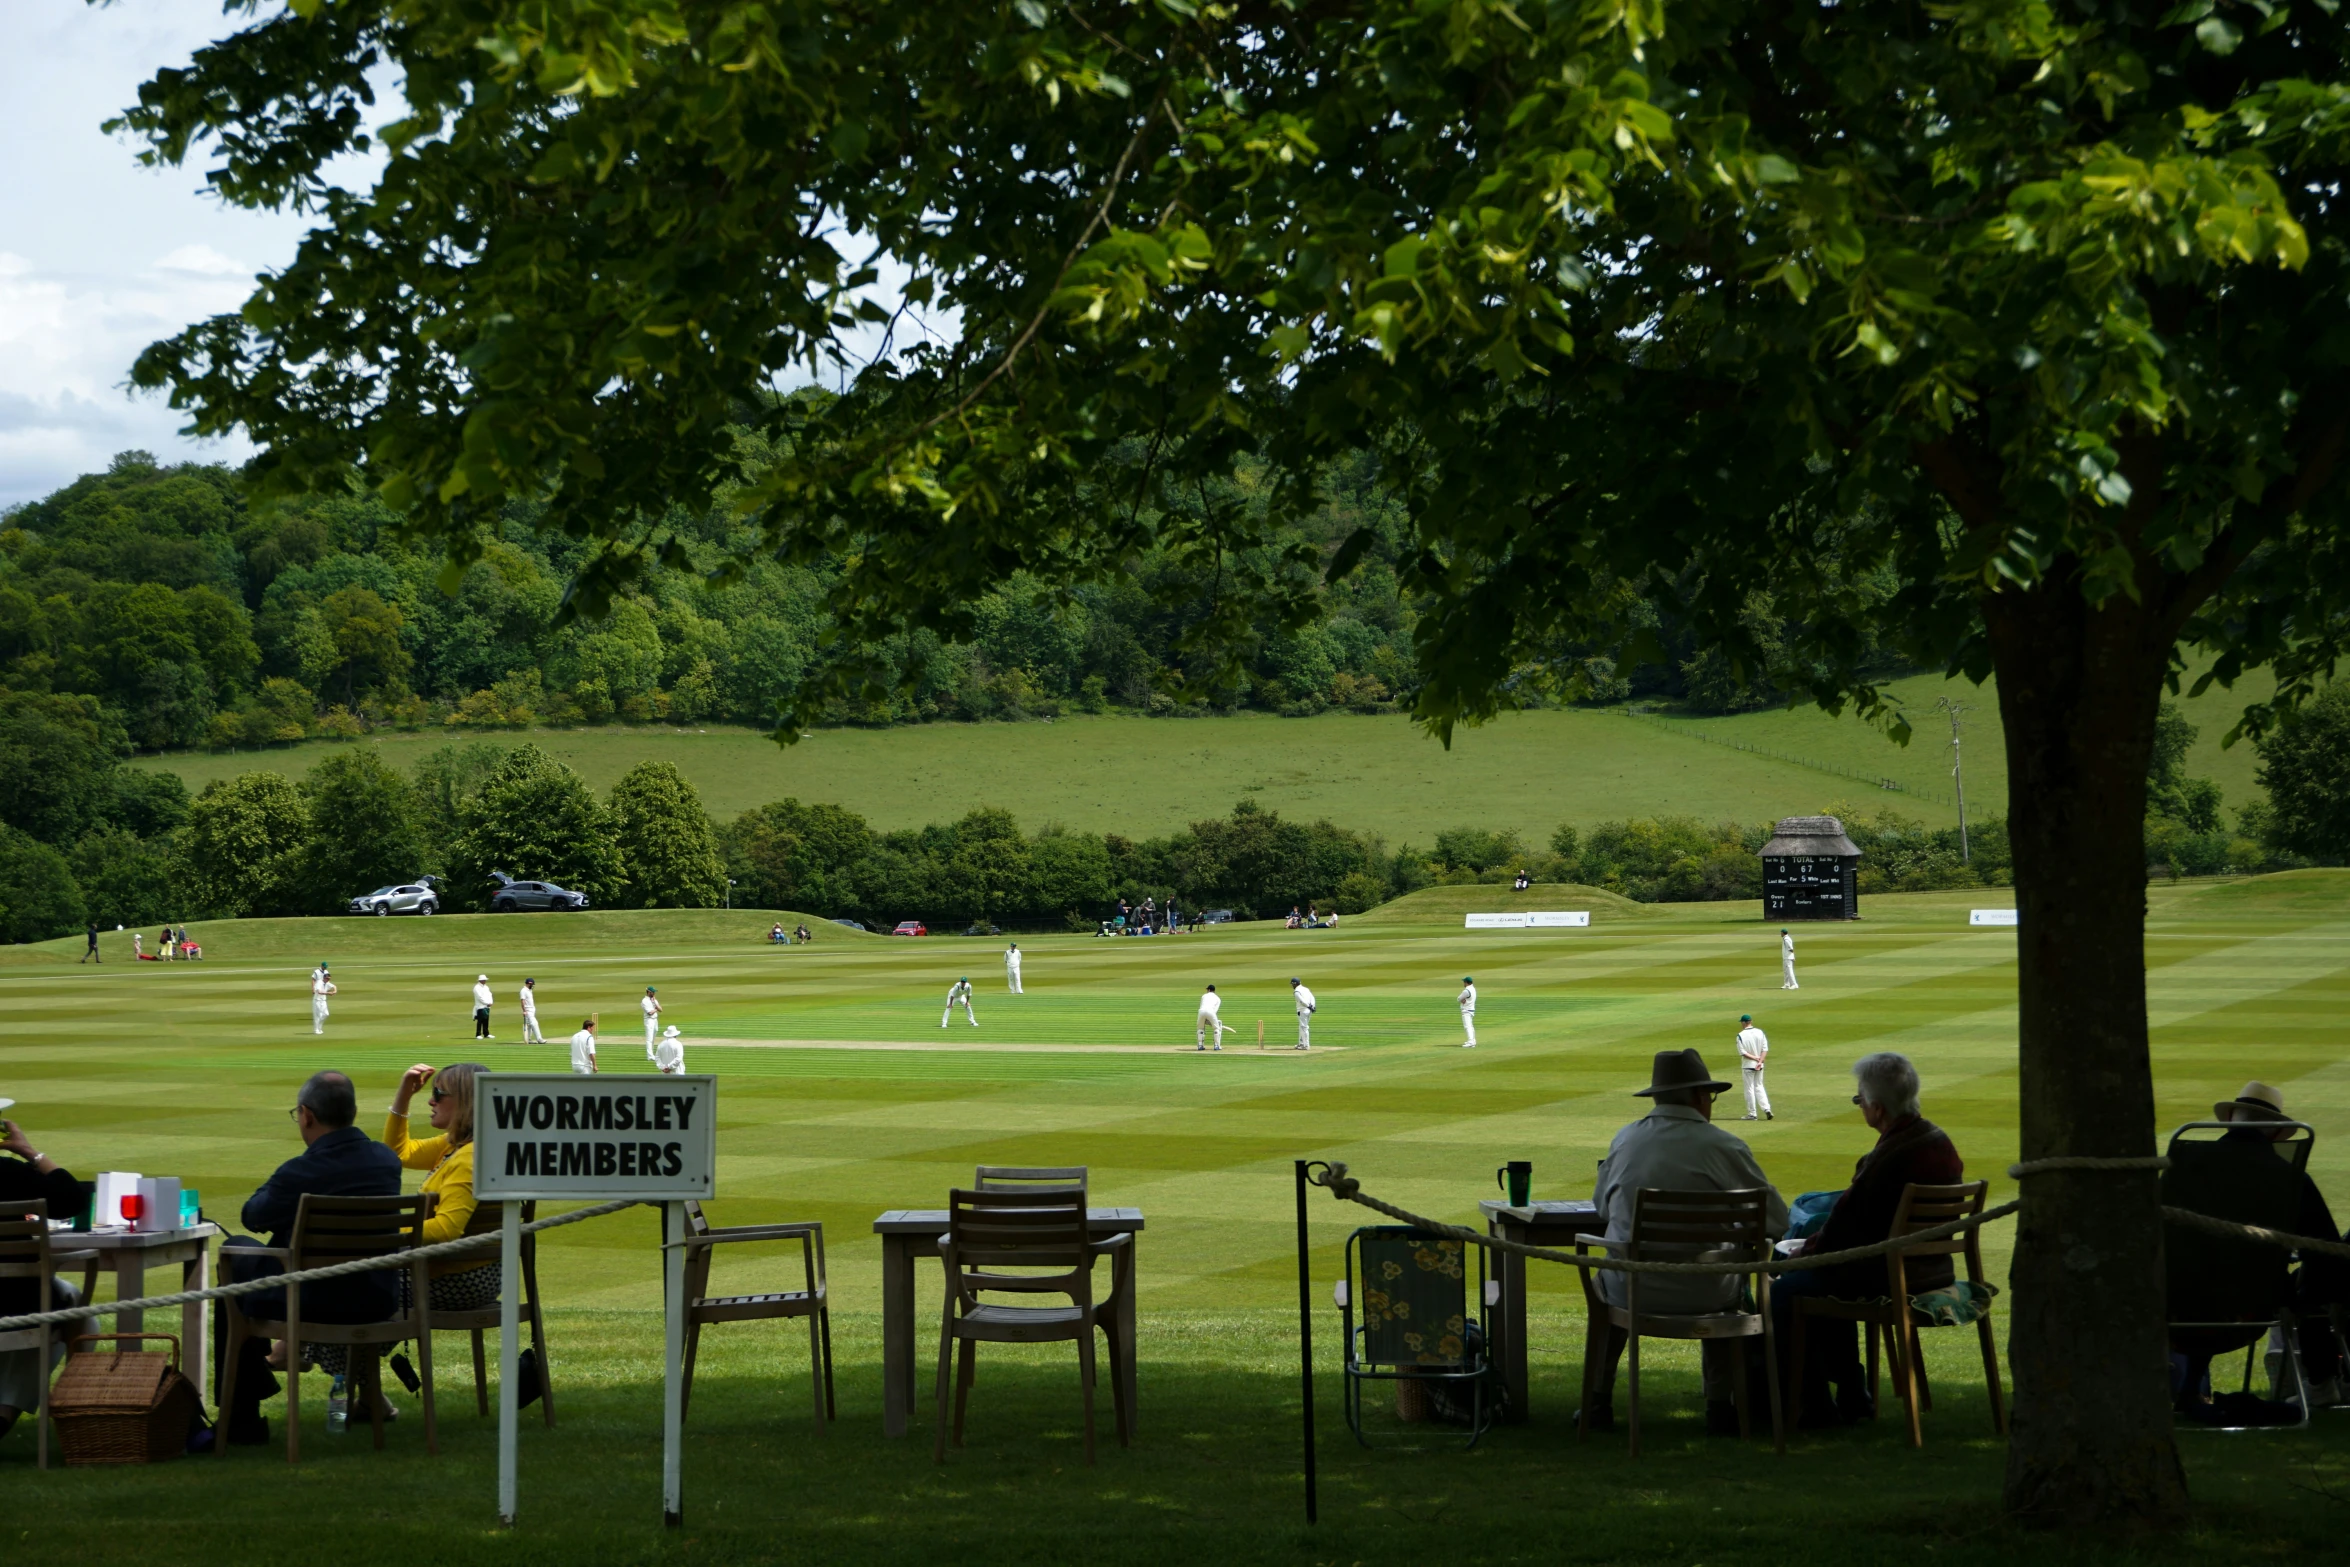 a cricket match with people sitting around eating and watching